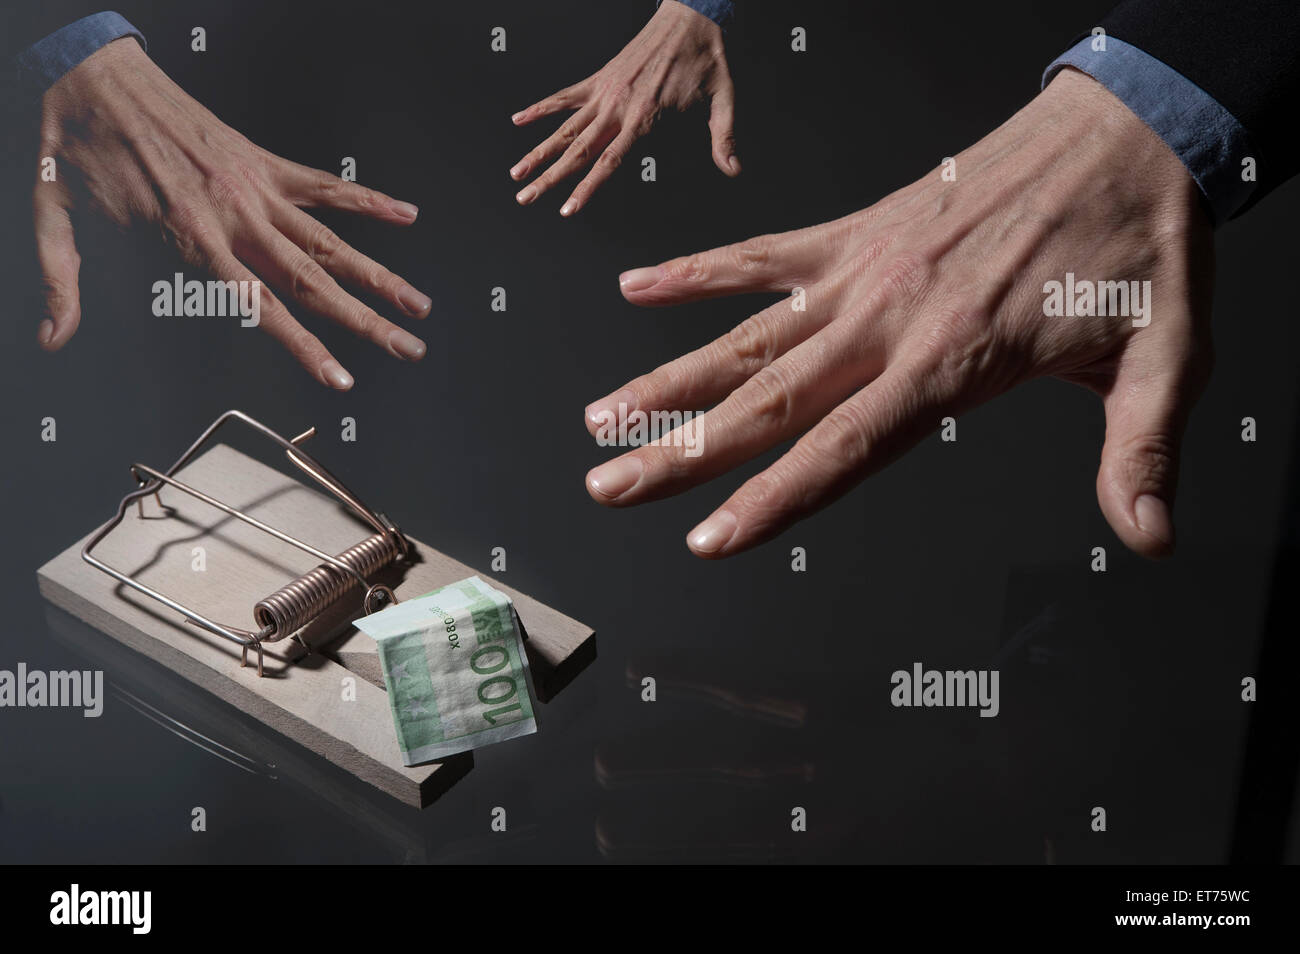 businessman's hands reaching for money in mousetrap, Bavaria, Germany Stock Photo